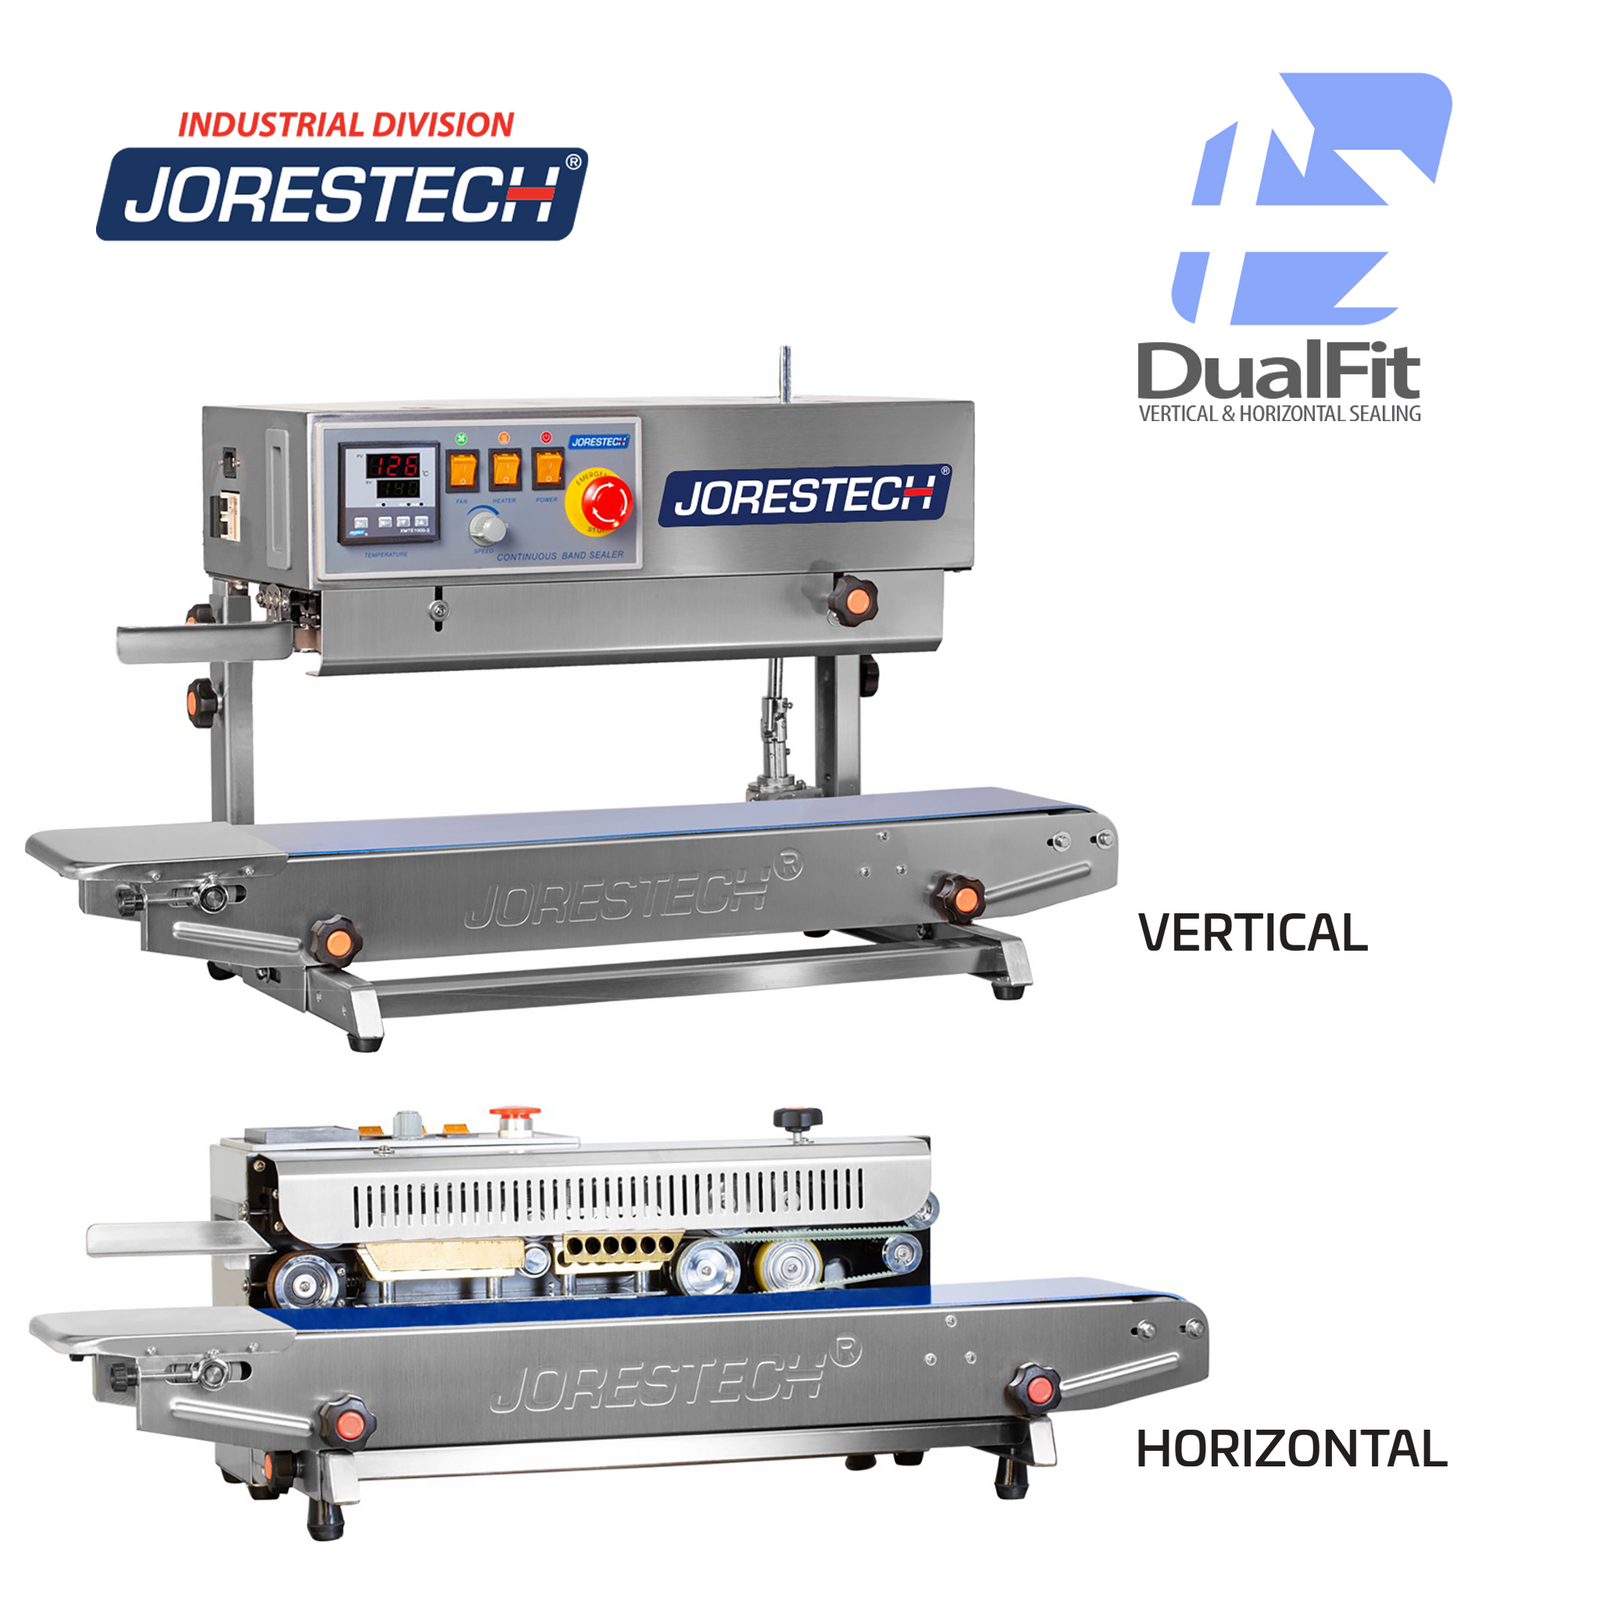 showing the vertical and horizontal positioning of the  stainless steel JORESTECH left to right continuous band sealer. Dual fit logo with arrows indicate that this table top bag sealer can be used for vertical and for horizontal applications. 